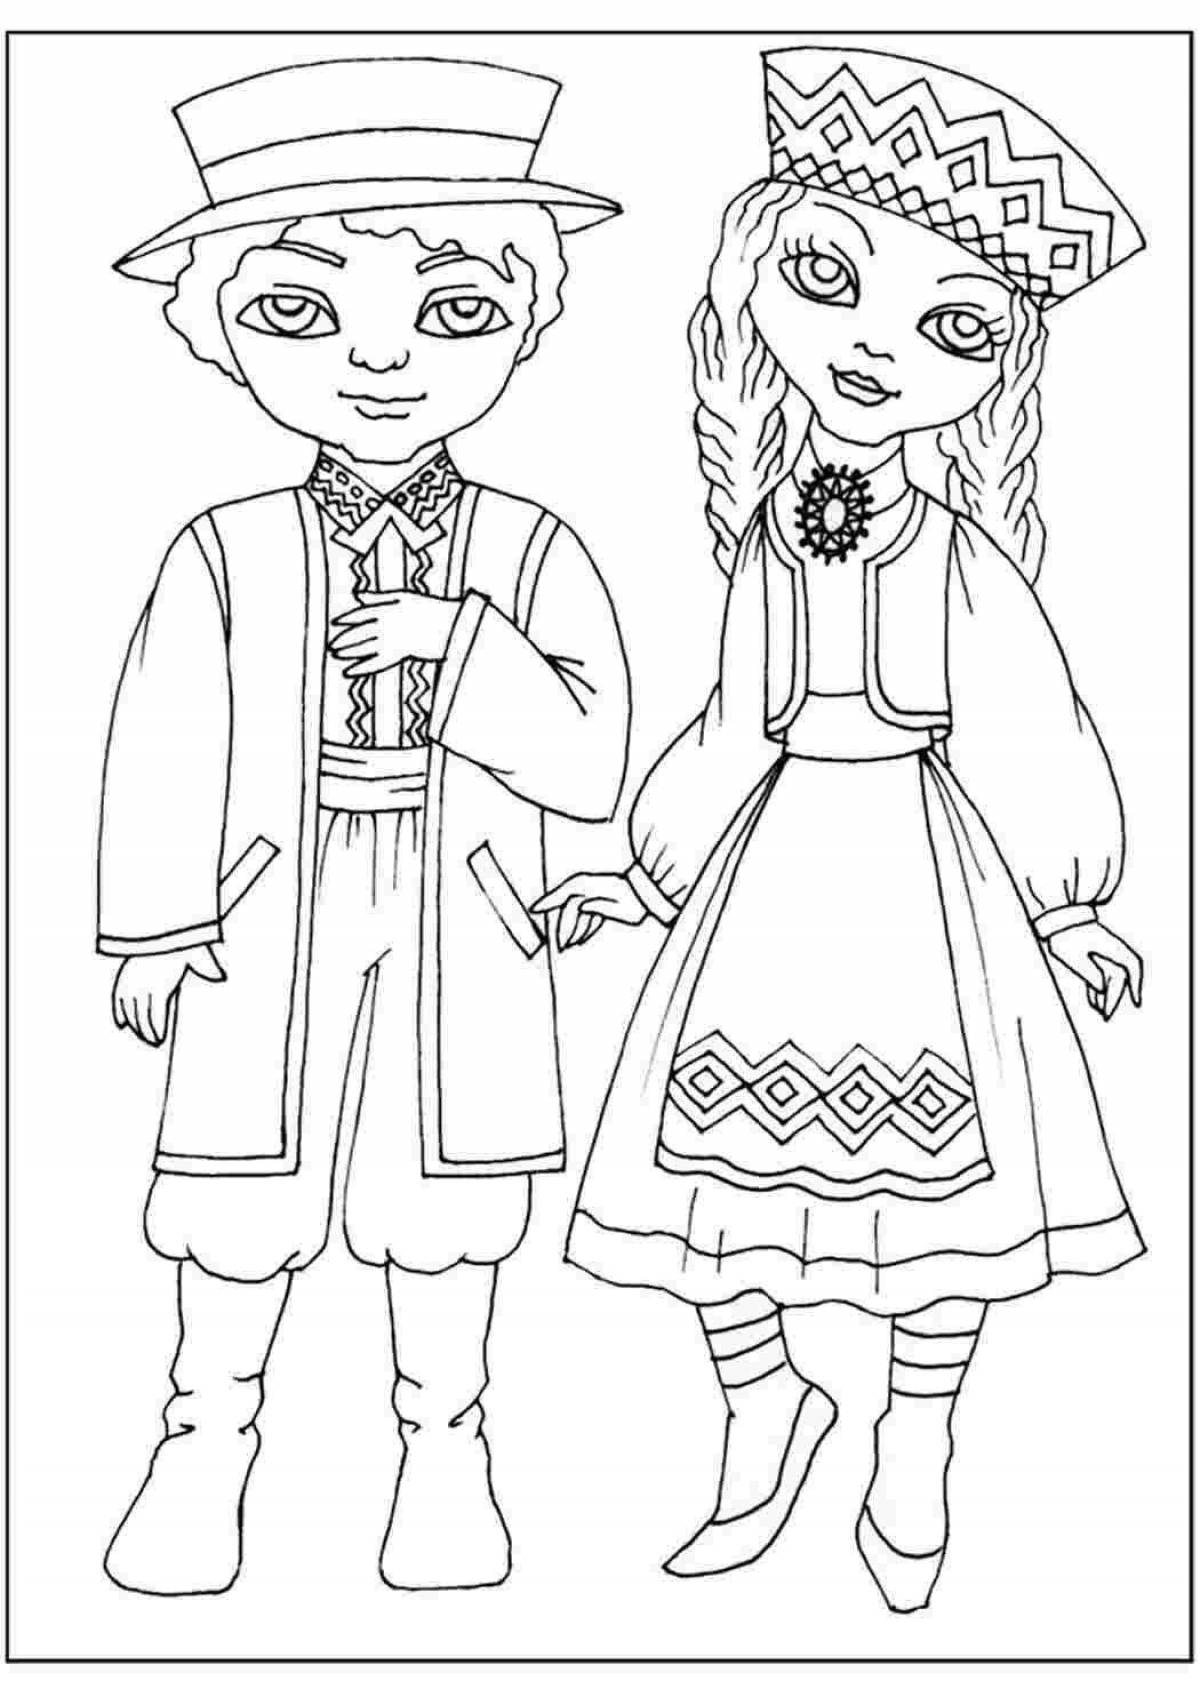 Coloring page intricate Ukrainian national costume